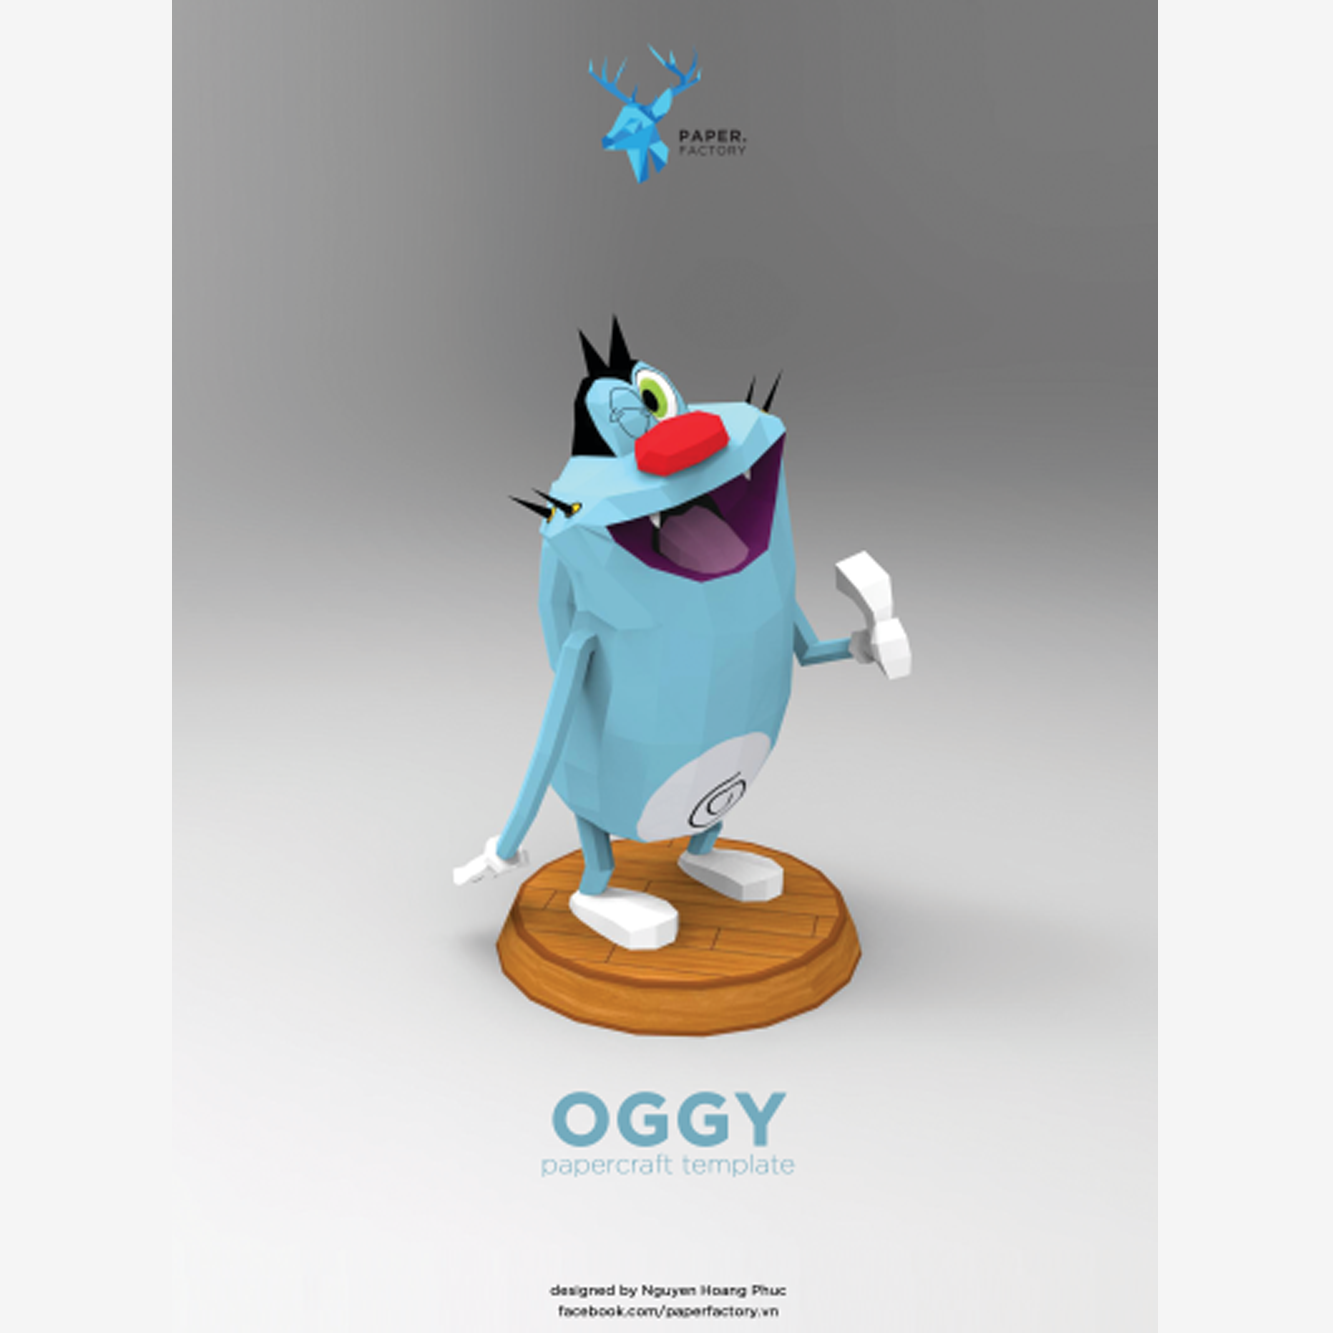 [Oggy and the Cockroaches] Oggy